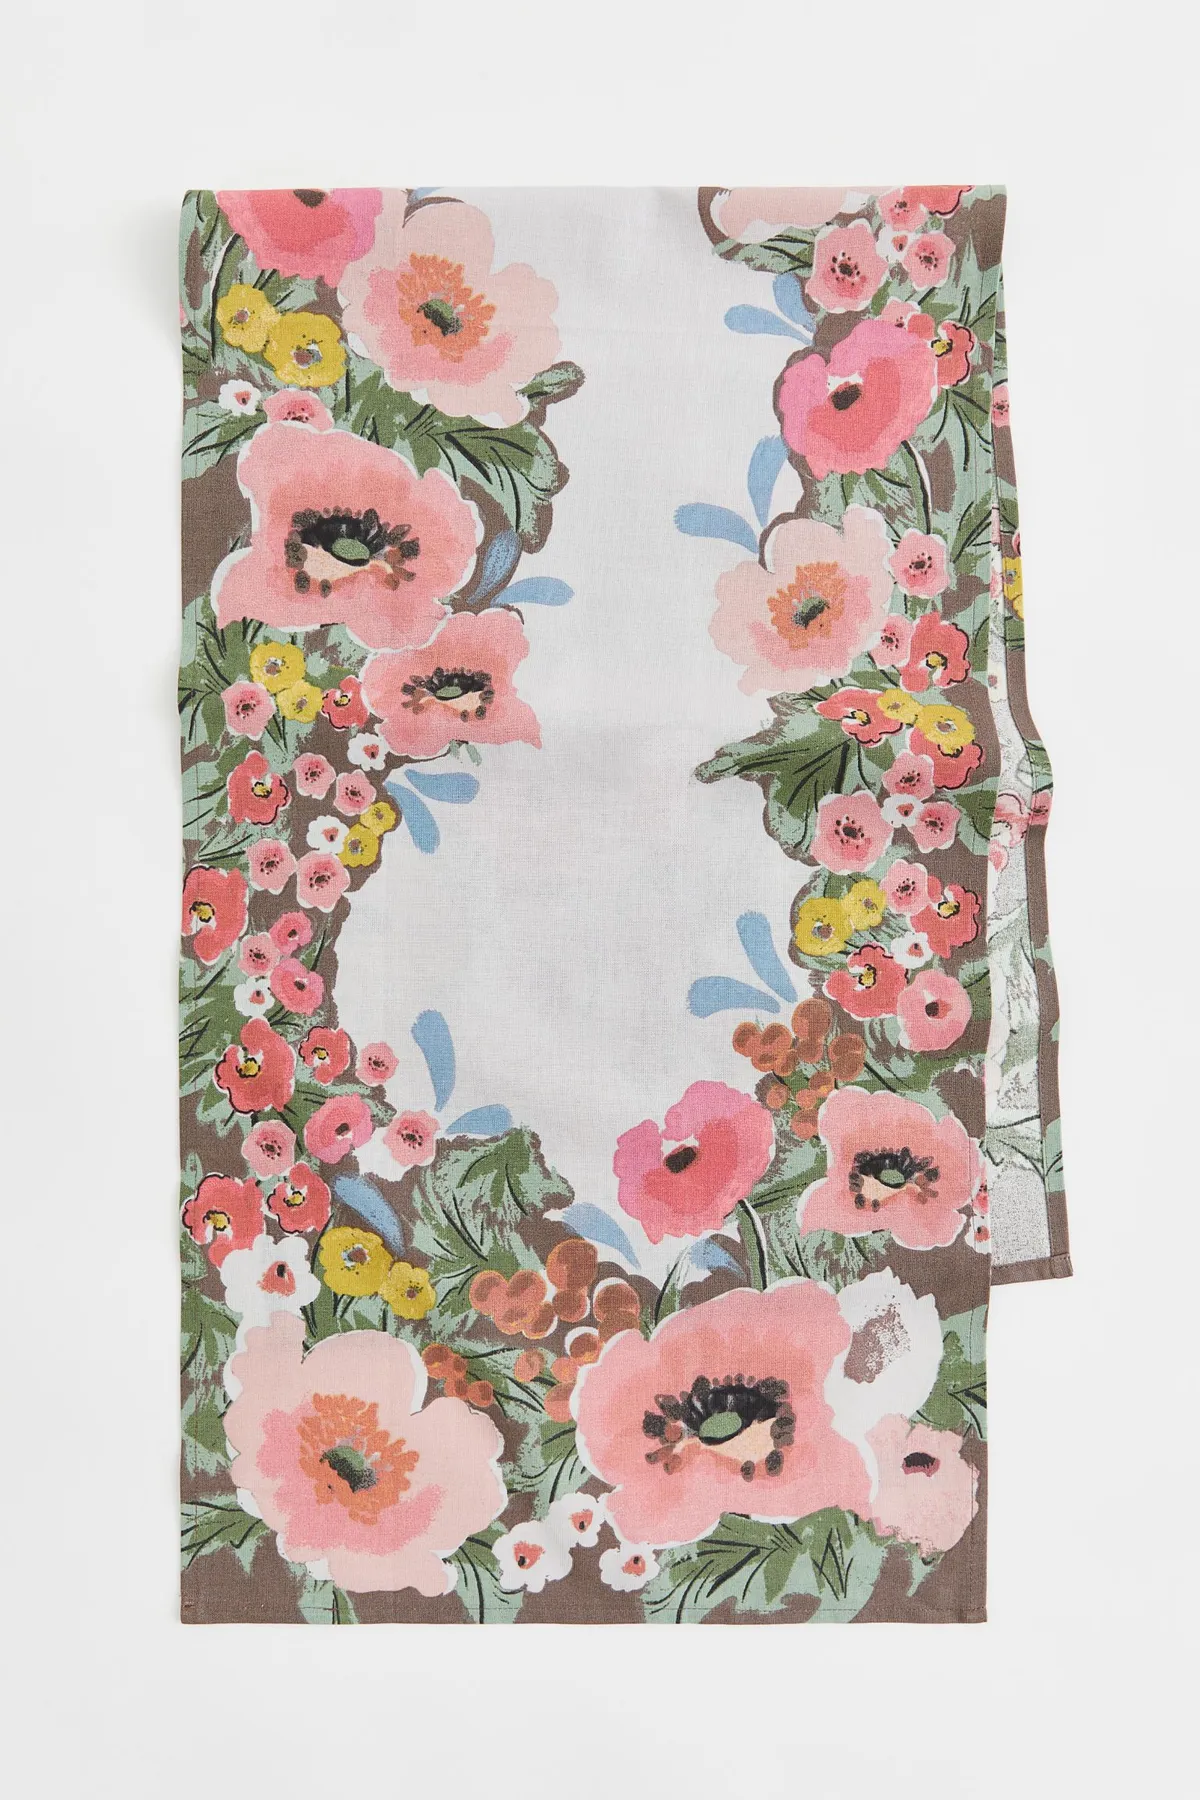 Floral cotton table runner